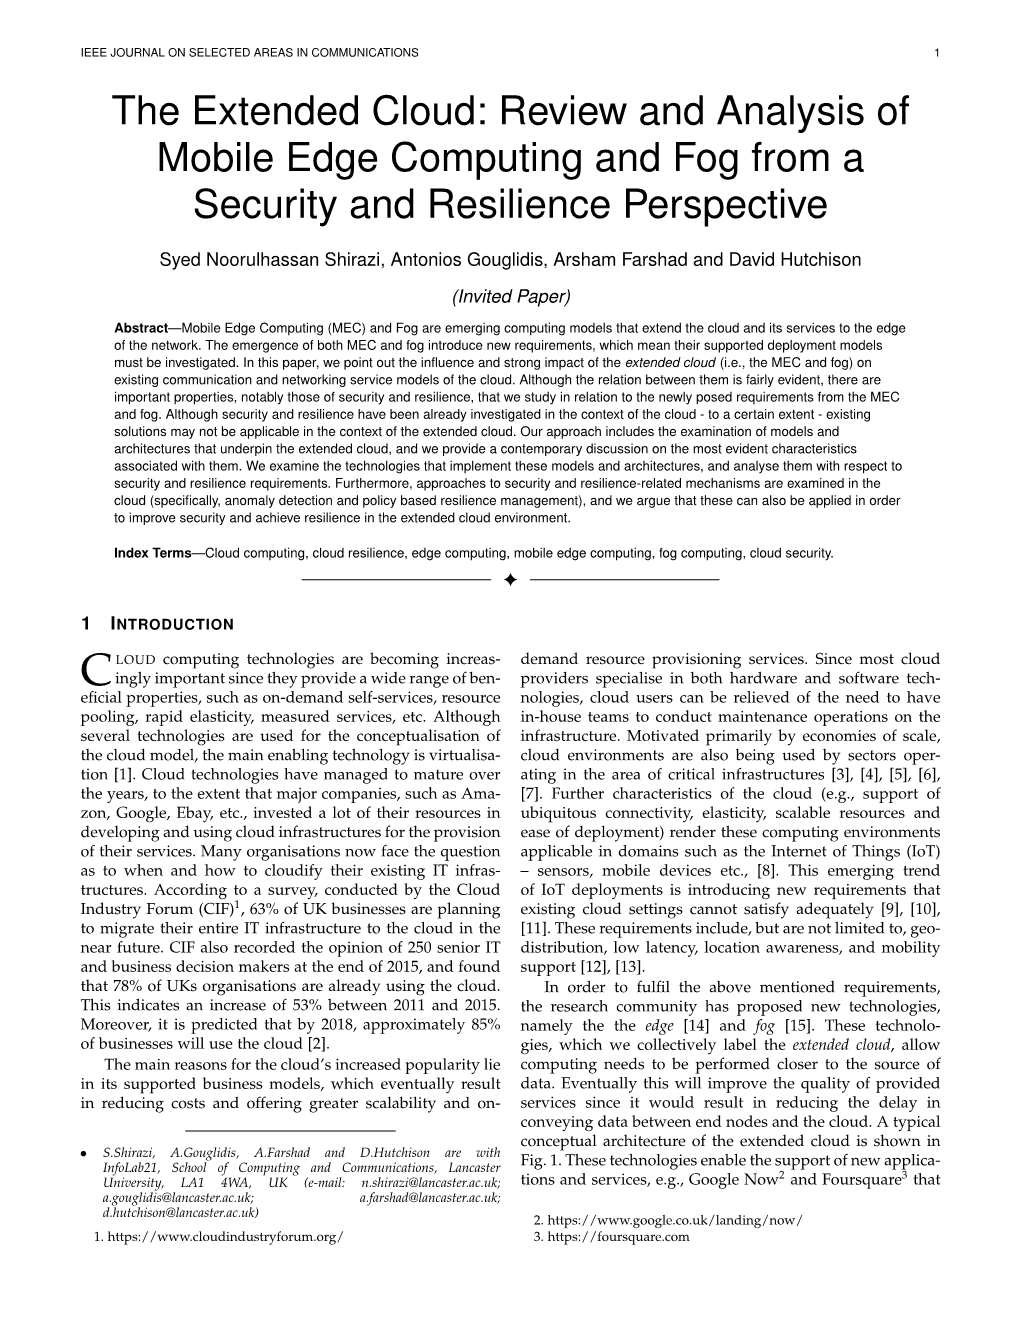 Review and Analysis of Mobile Edge Computing and Fog from a Security and Resilience Perspective